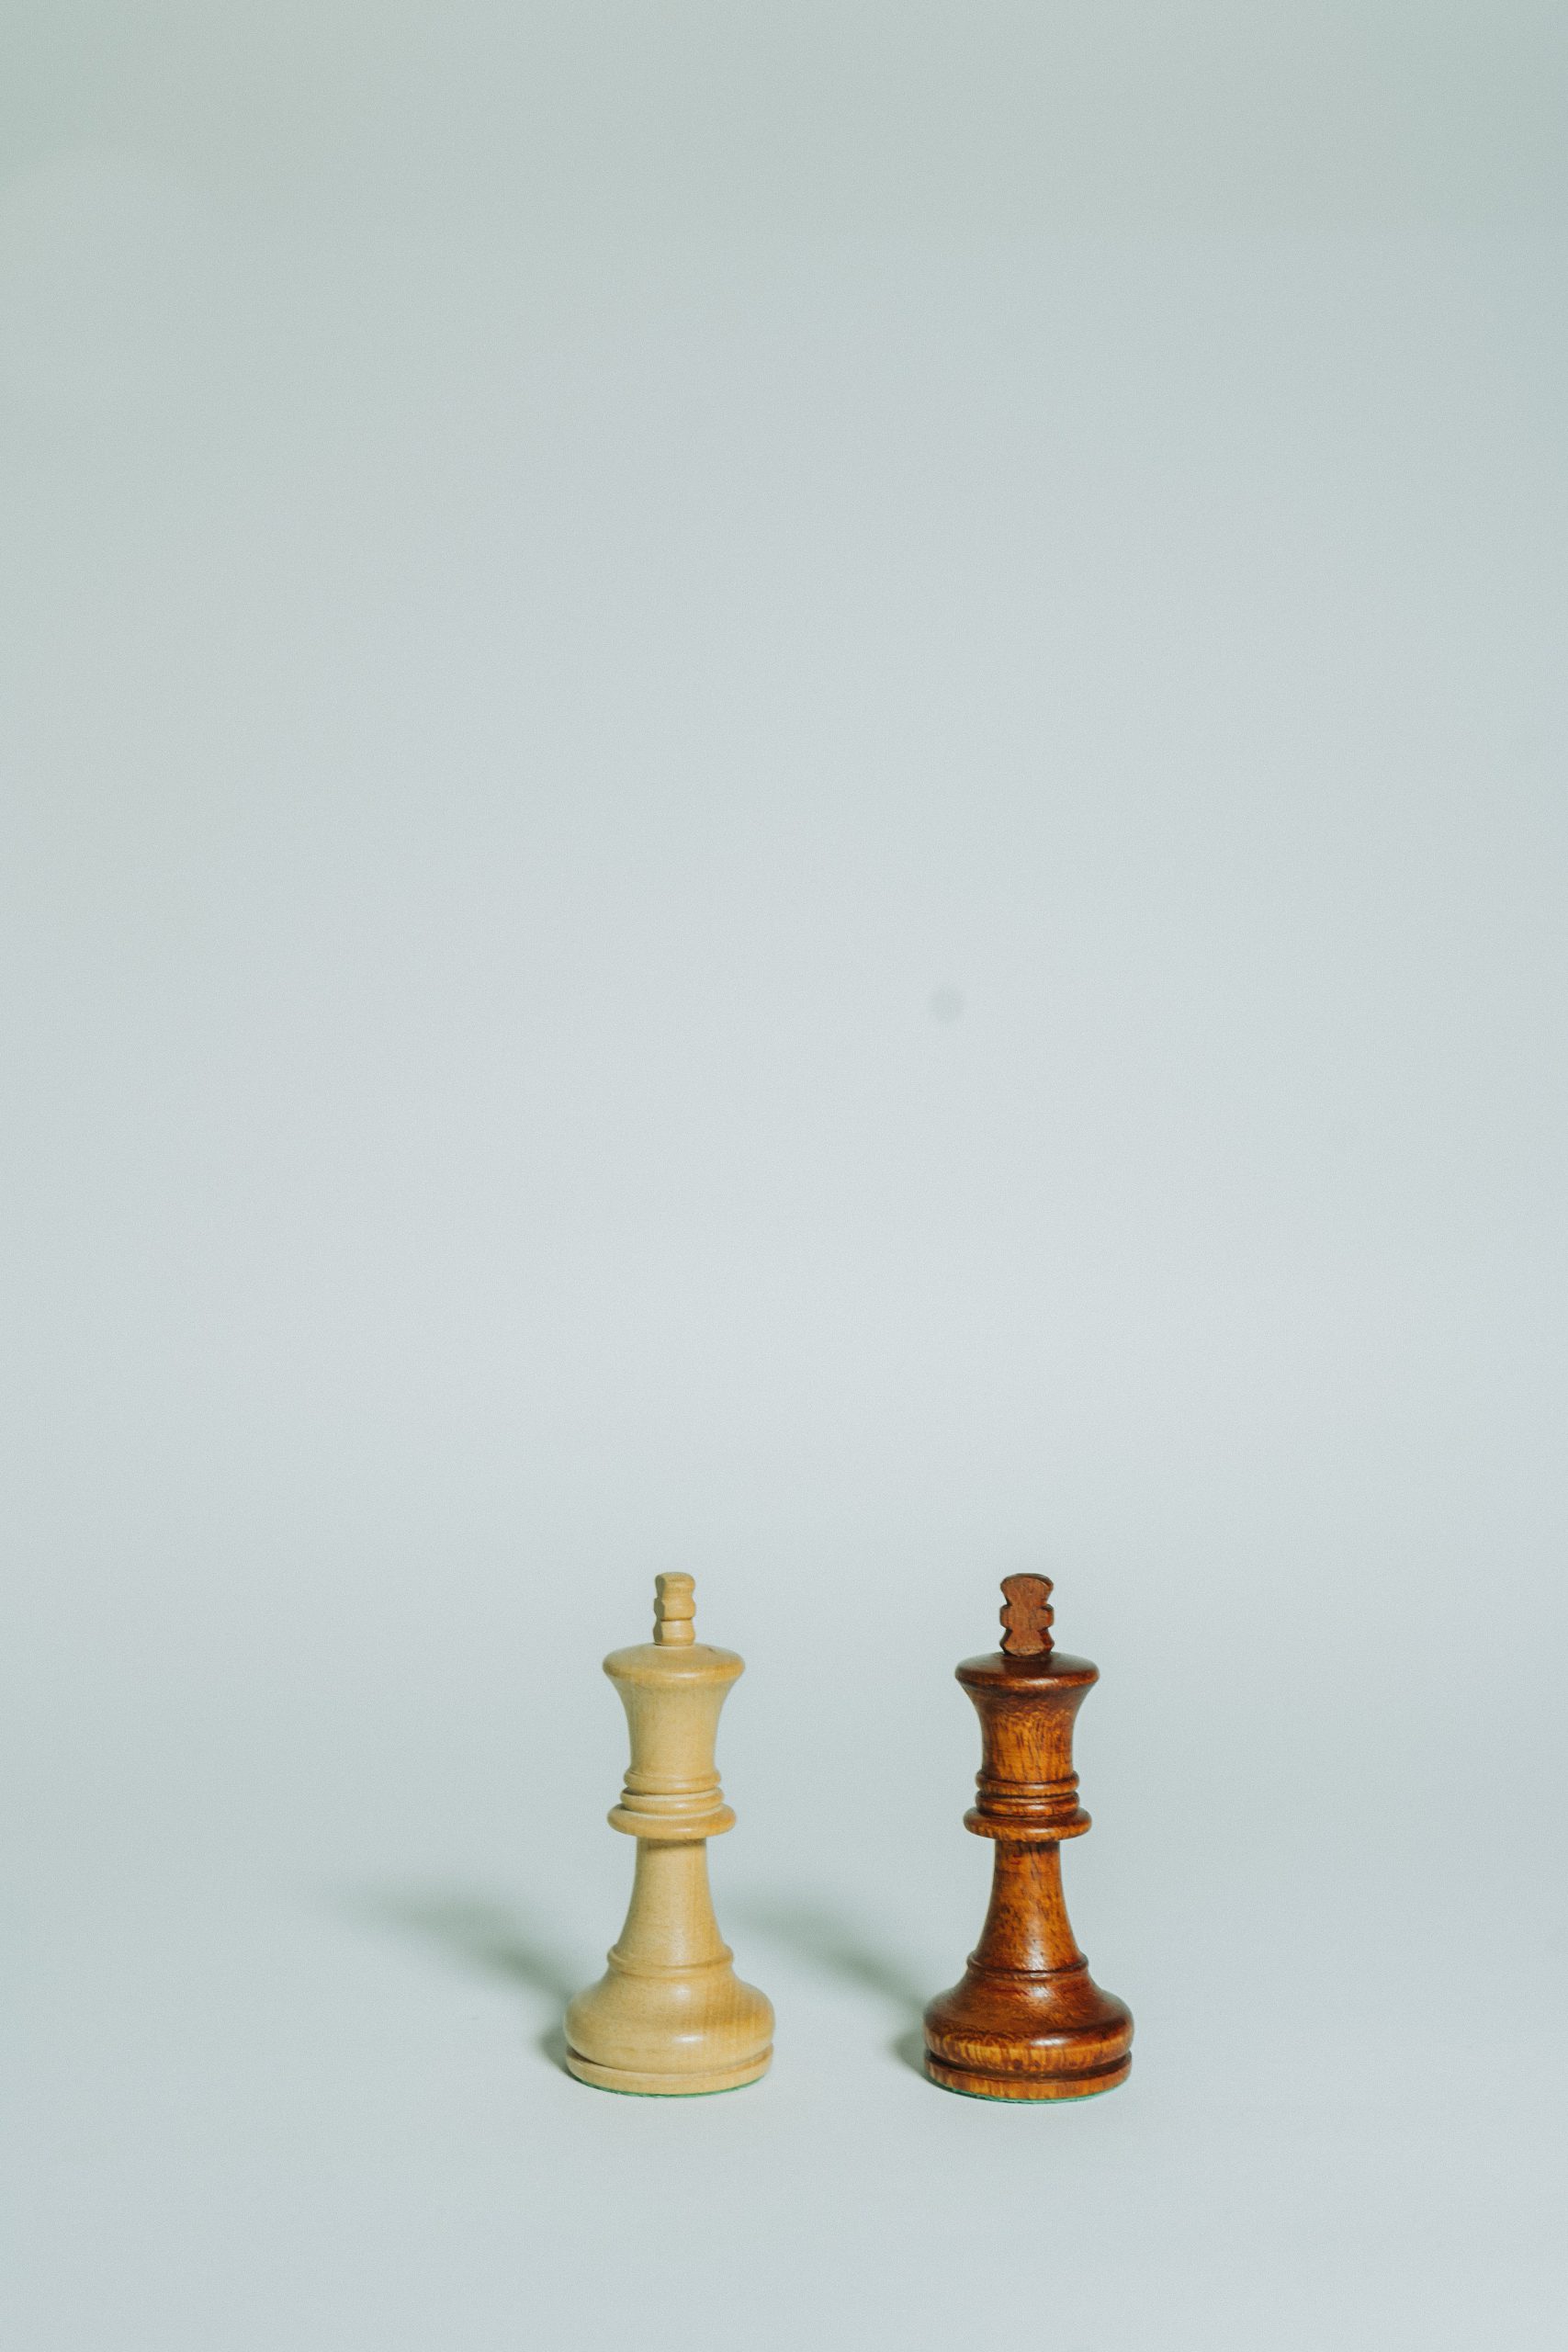 what and black king chess piece standing beside each other